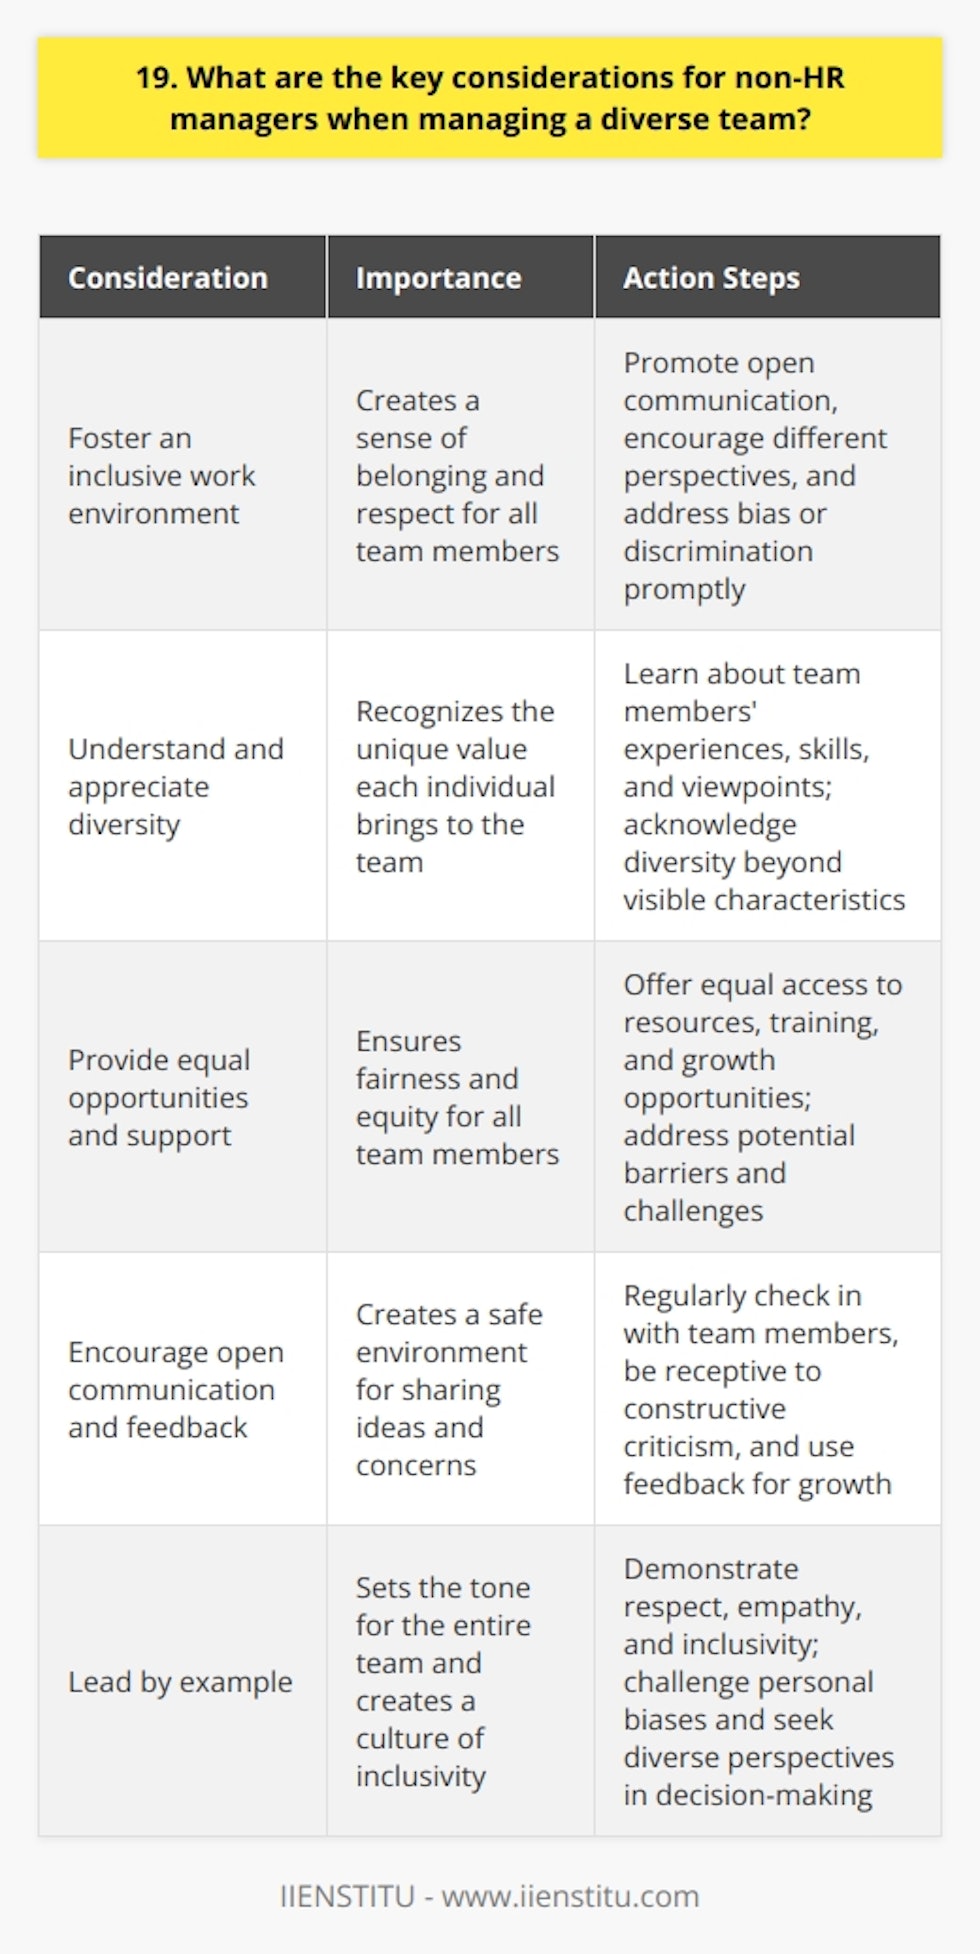 As a non-HR manager, managing a diverse team requires careful consideration of several key factors. First and foremost, its crucial to foster an inclusive work environment that values and respects all team members, regardless of their background or identity. This means actively promoting open communication, encouraging different perspectives, and addressing any instances of bias or discrimination promptly and fairly. Understand and Appreciate Diversity Take the time to learn about your team members unique experiences, skills, and viewpoints. Recognize that diversity goes beyond visible characteristics and encompasses a wide range of attributes, such as age, education, personality, and life experiences. By genuinely appreciating the value that each individual brings to the table, you can create a more cohesive and productive team dynamic. Provide Equal Opportunities and Support Ensure that all team members have equal access to resources, training, and growth opportunities. Be mindful of potential barriers or challenges that certain individuals may face and work proactively to address them. This could involve providing accommodations for disabilities, offering flexible work arrangements, or advocating for policies that promote fairness and equity. Encourage Open Communication and Feedback Create a safe and open environment where team members feel comfortable sharing their ideas, concerns, and feedback. Regularly check in with your team, both individually and as a group, to gauge their well-being and address any issues that may arise. Be receptive to constructive criticism and use it as an opportunity to learn and grow as a manager. Lead by Example As a leader, your actions and behaviors set the tone for the entire team. Consistently demonstrate respect, empathy, and inclusivity in your interactions with others. Be willing to challenge your own biases and assumptions, and actively seek out diverse perspectives when making decisions. By modeling the behaviors you wish to see in your team, you can create a culture of inclusivity that permeates throughout the organization. Remember, managing diversity is an ongoing process that requires commitment, empathy, and a willingness to learn and adapt. By prioritizing these key considerations, you can unlock the full potential of your diverse team and foster a workplace where everyone feels valued, supported, and empowered to succeed.